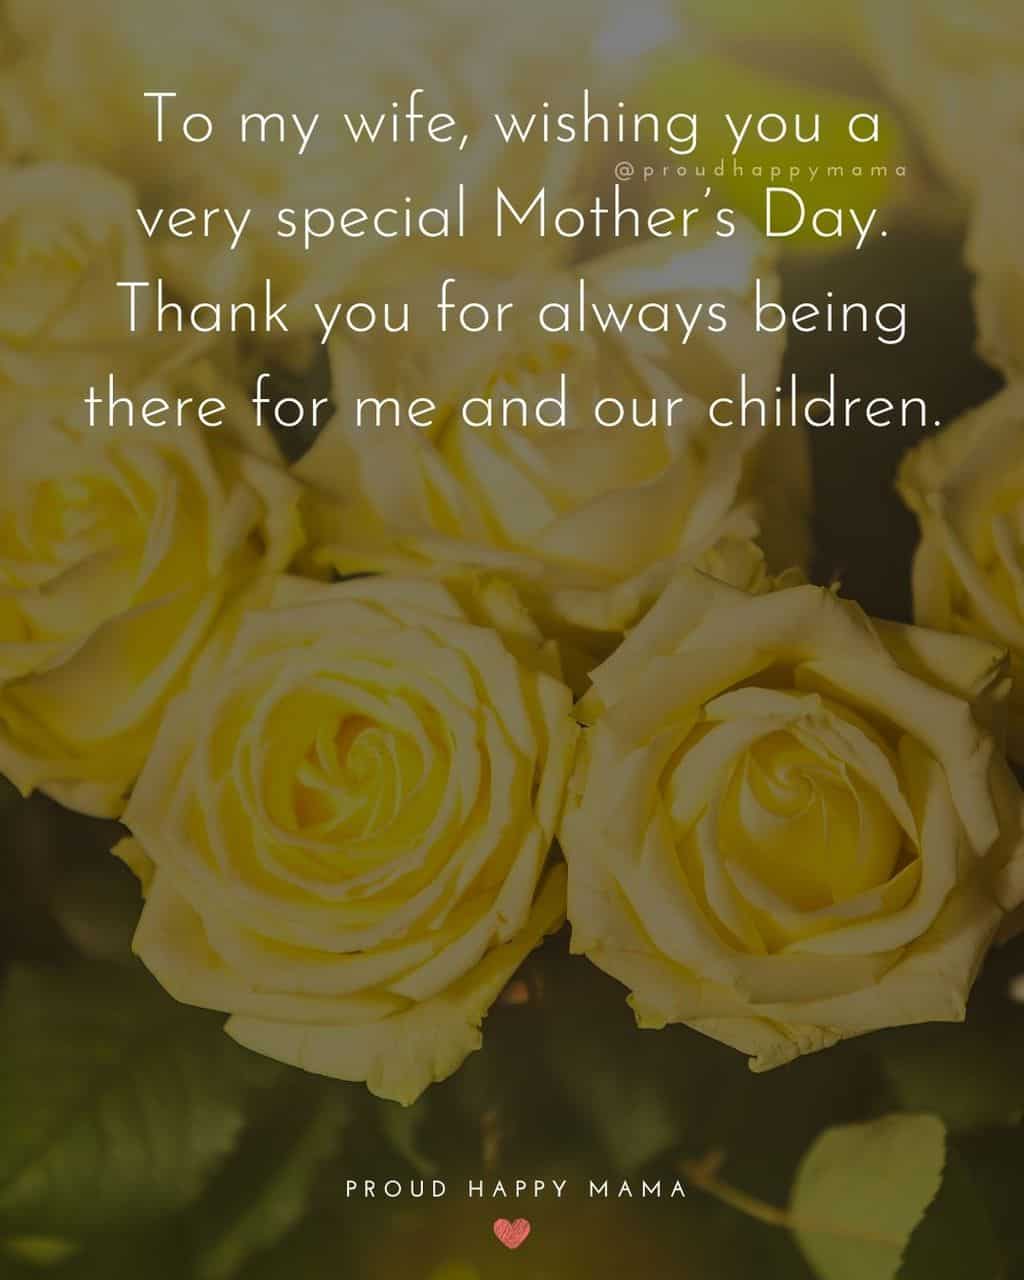 Happy Mothers Day Quotes For Wife - To my wife, wishing you a very special Mother’s Day. Thank you for always being there for